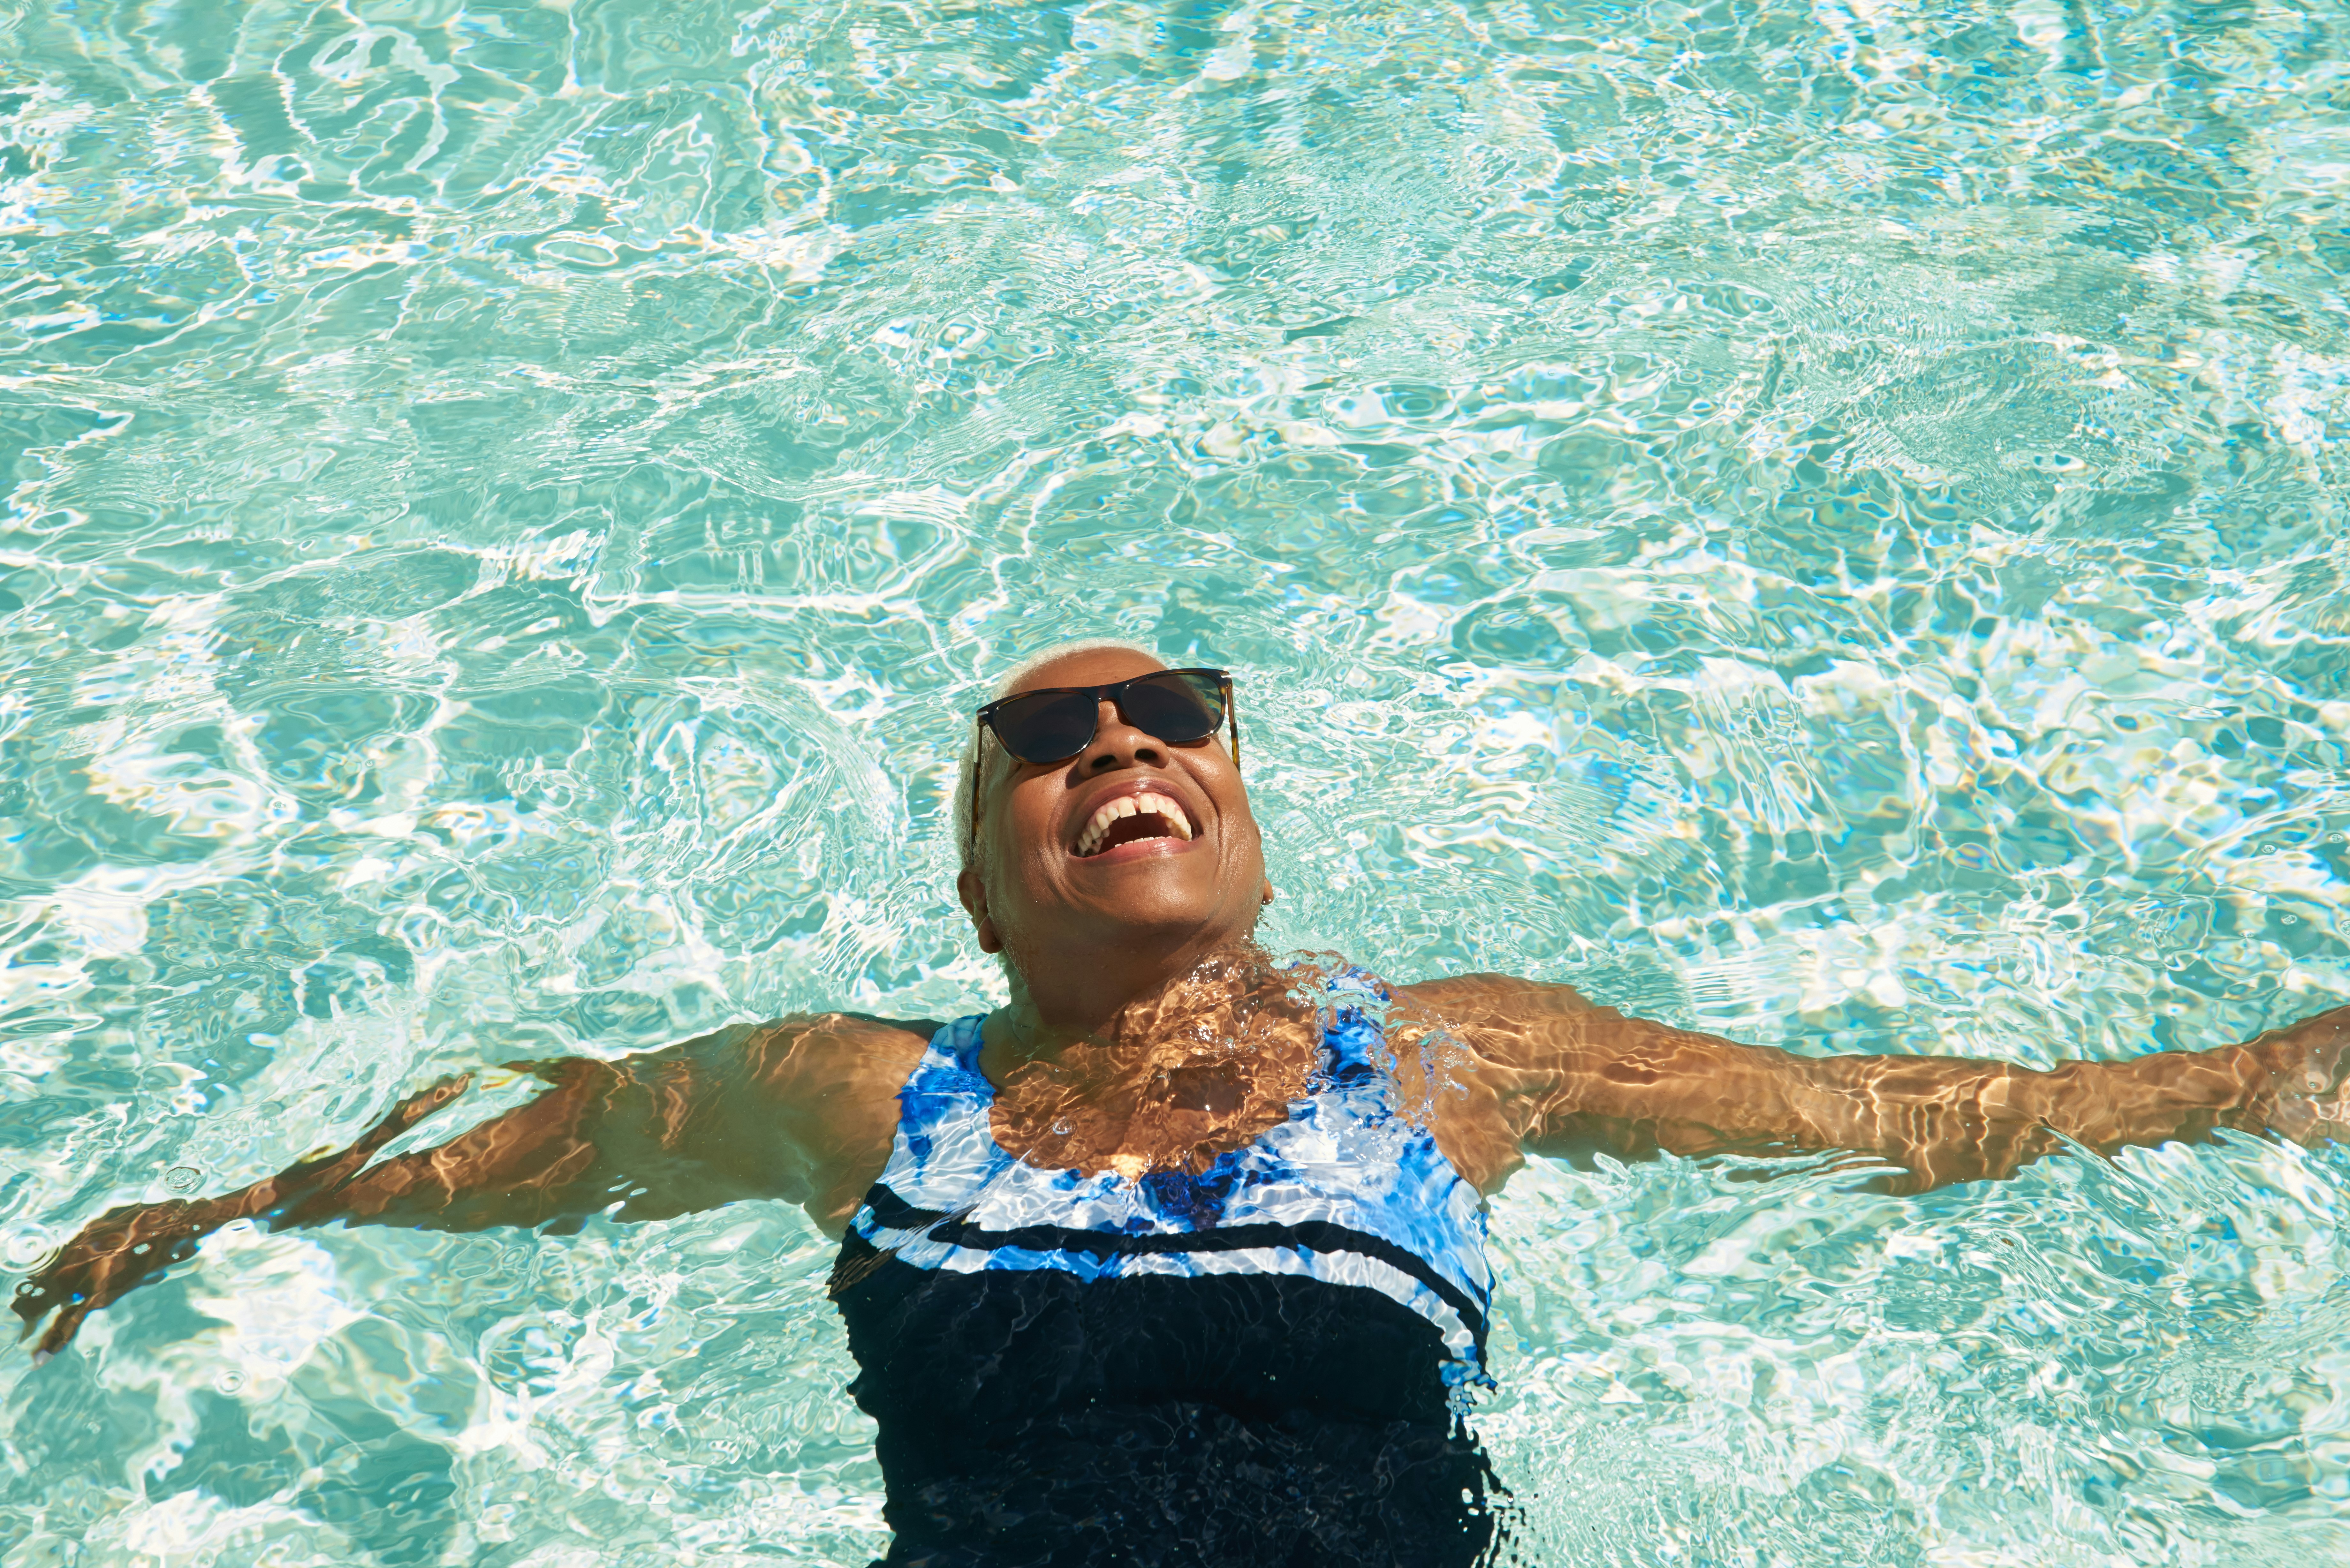 A mature woman relaxes in a swimming pool